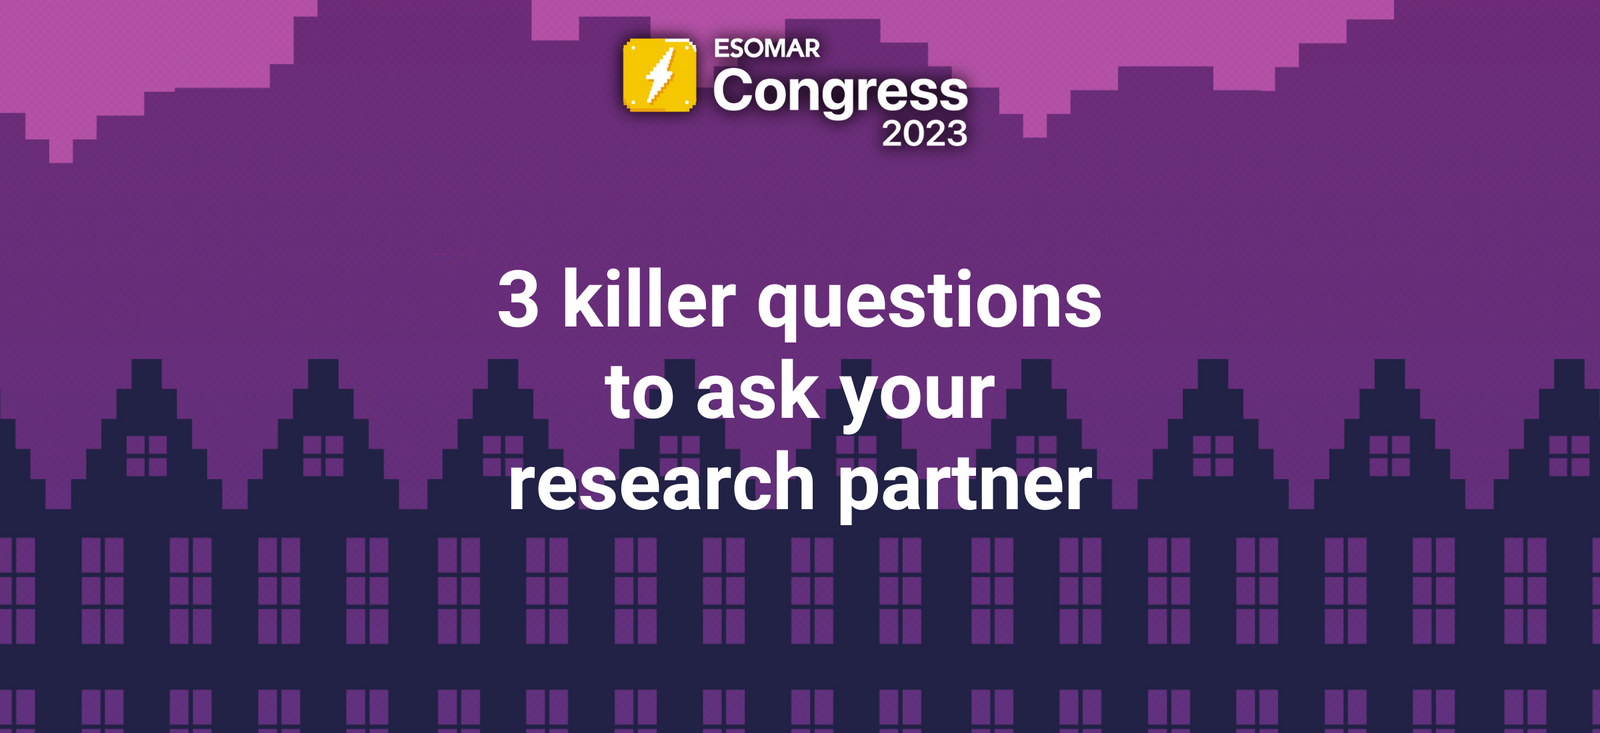 3 killer questions to ask your research partner